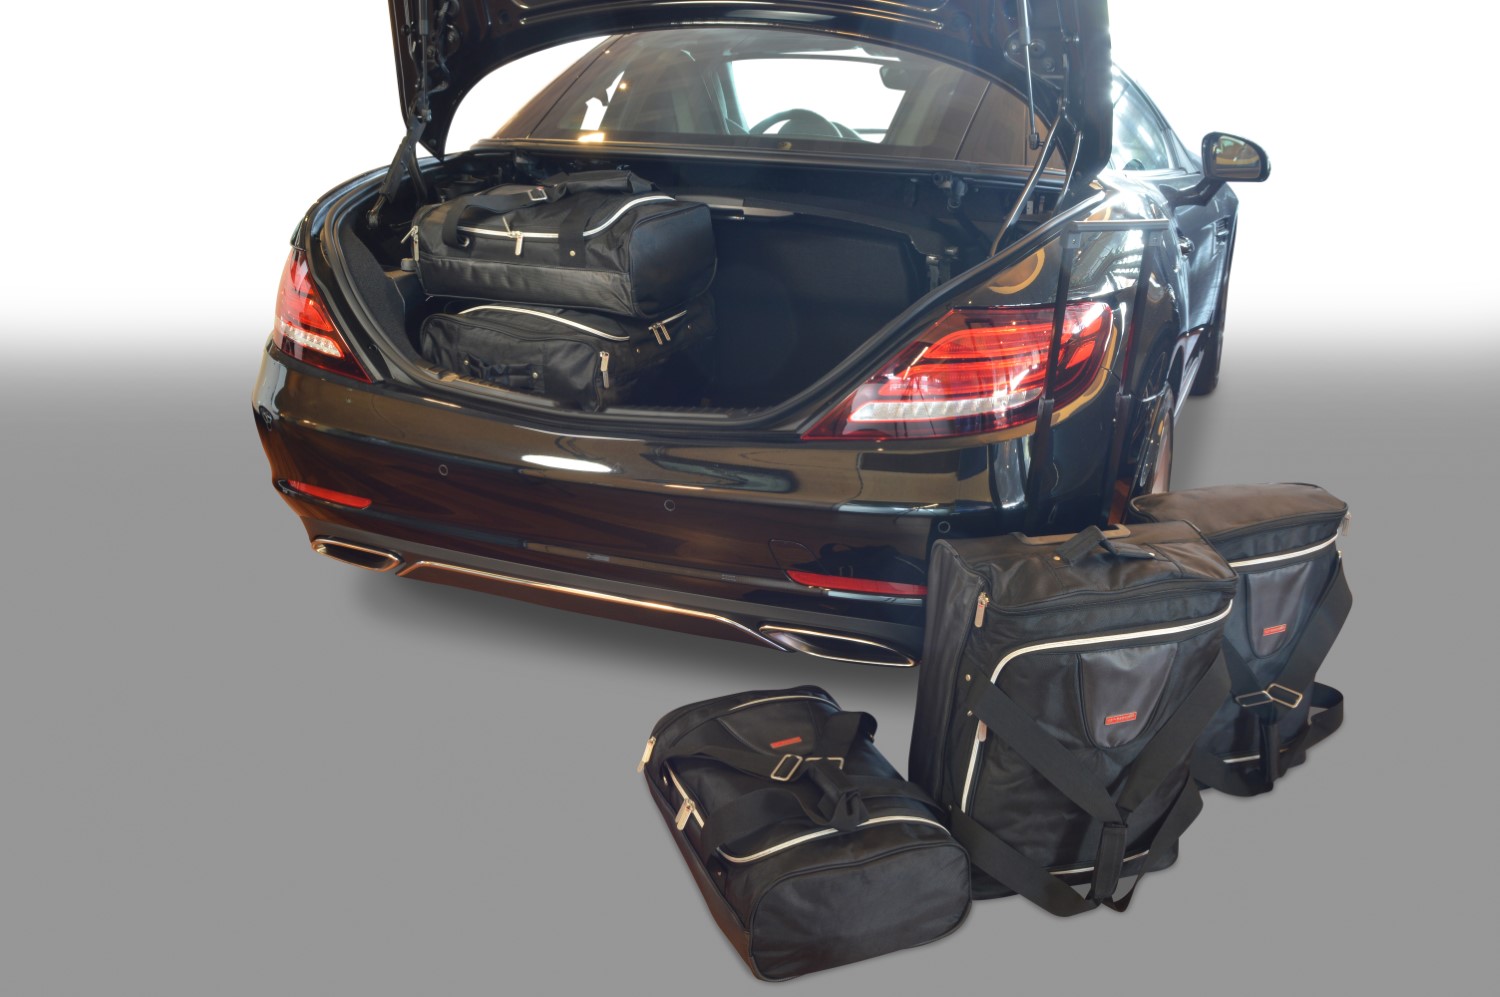 Travel bags fits Mercedes-Benz SLK (R171) tailor made (5 bags) | Time and  space saving for € 309 | Perfect fit Car Bags | Shop for Covers car covers